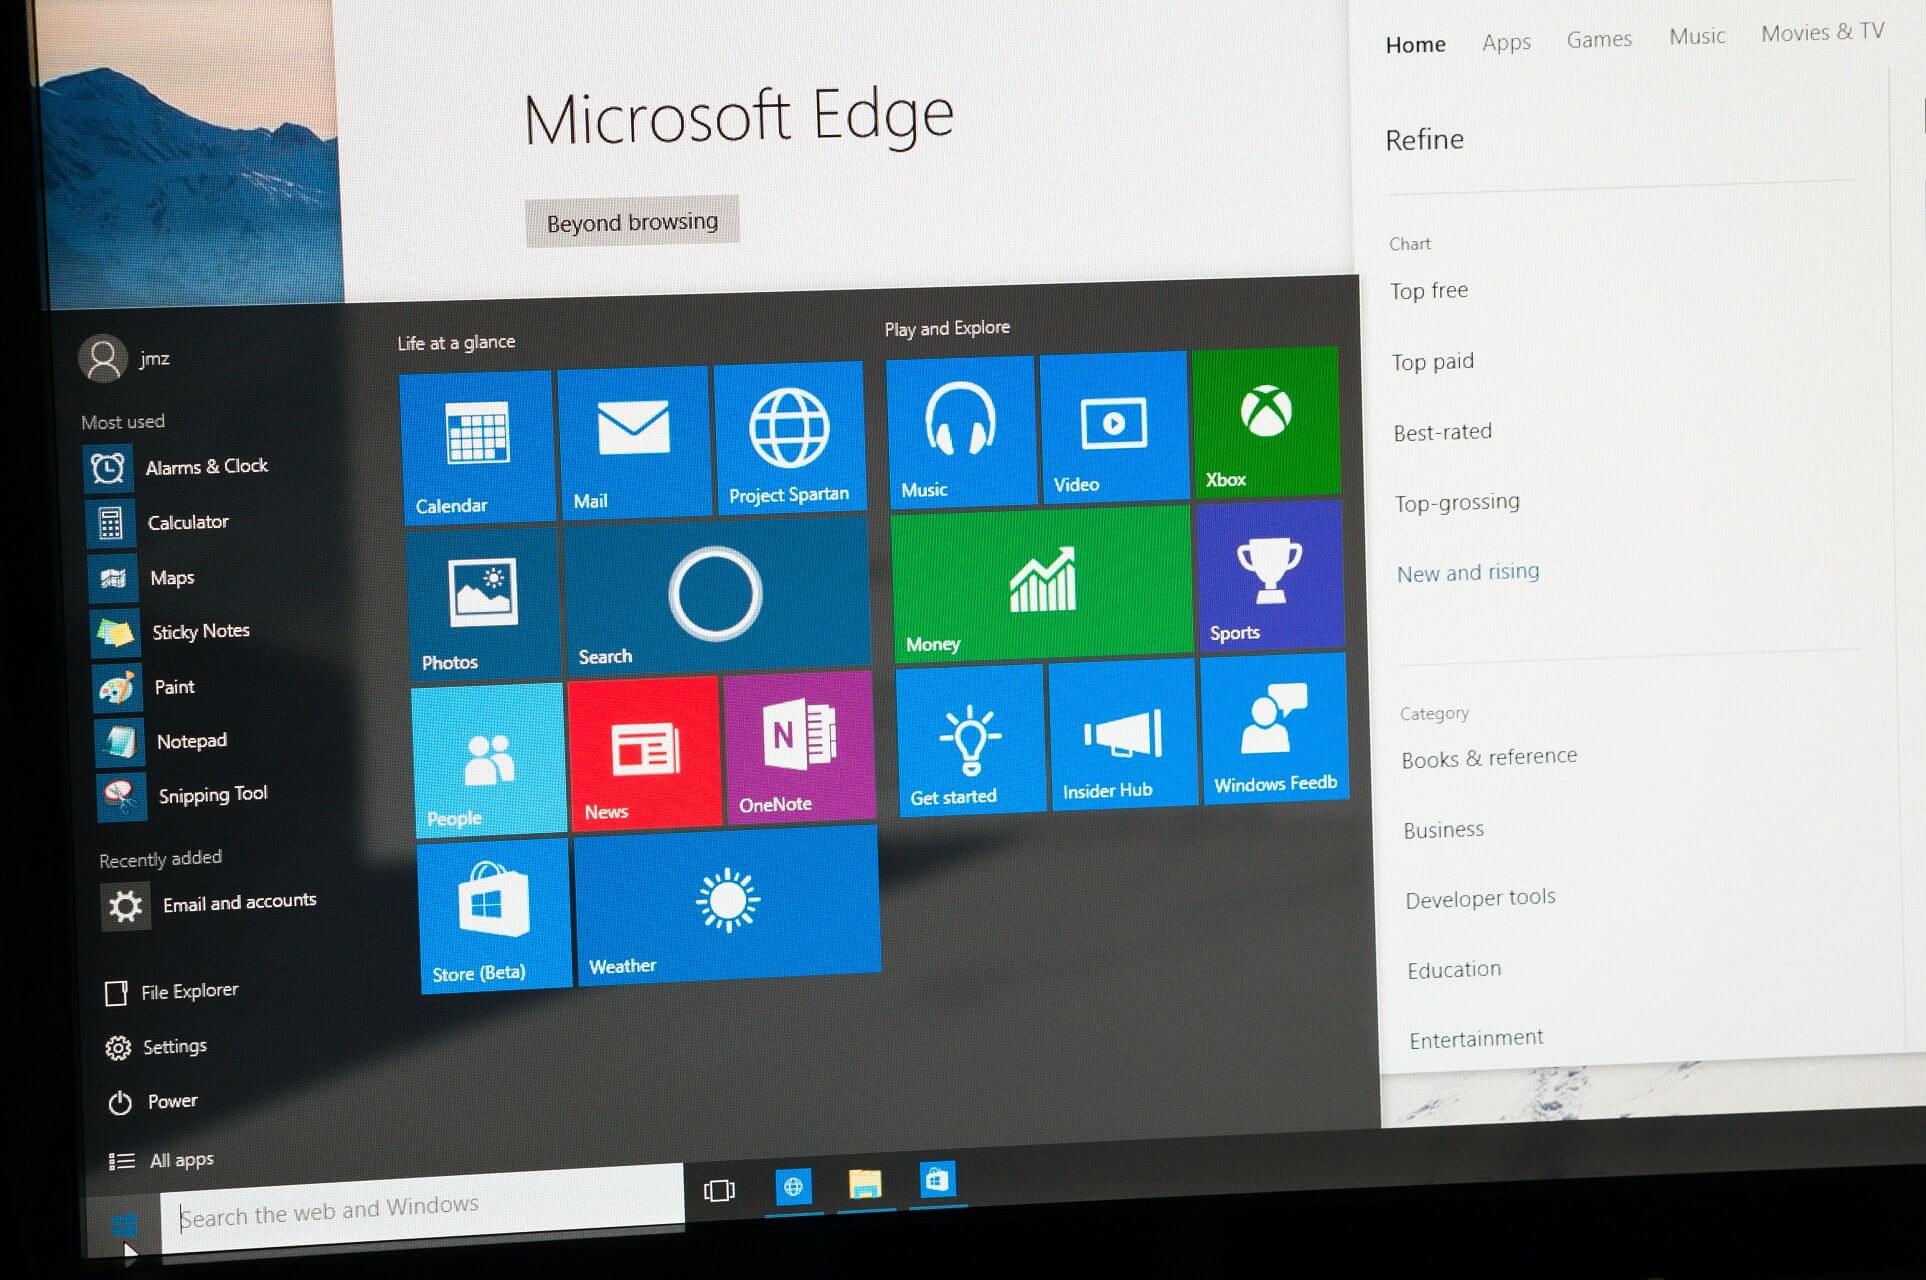 Microsoft Edge Dev update improved for developers and admins